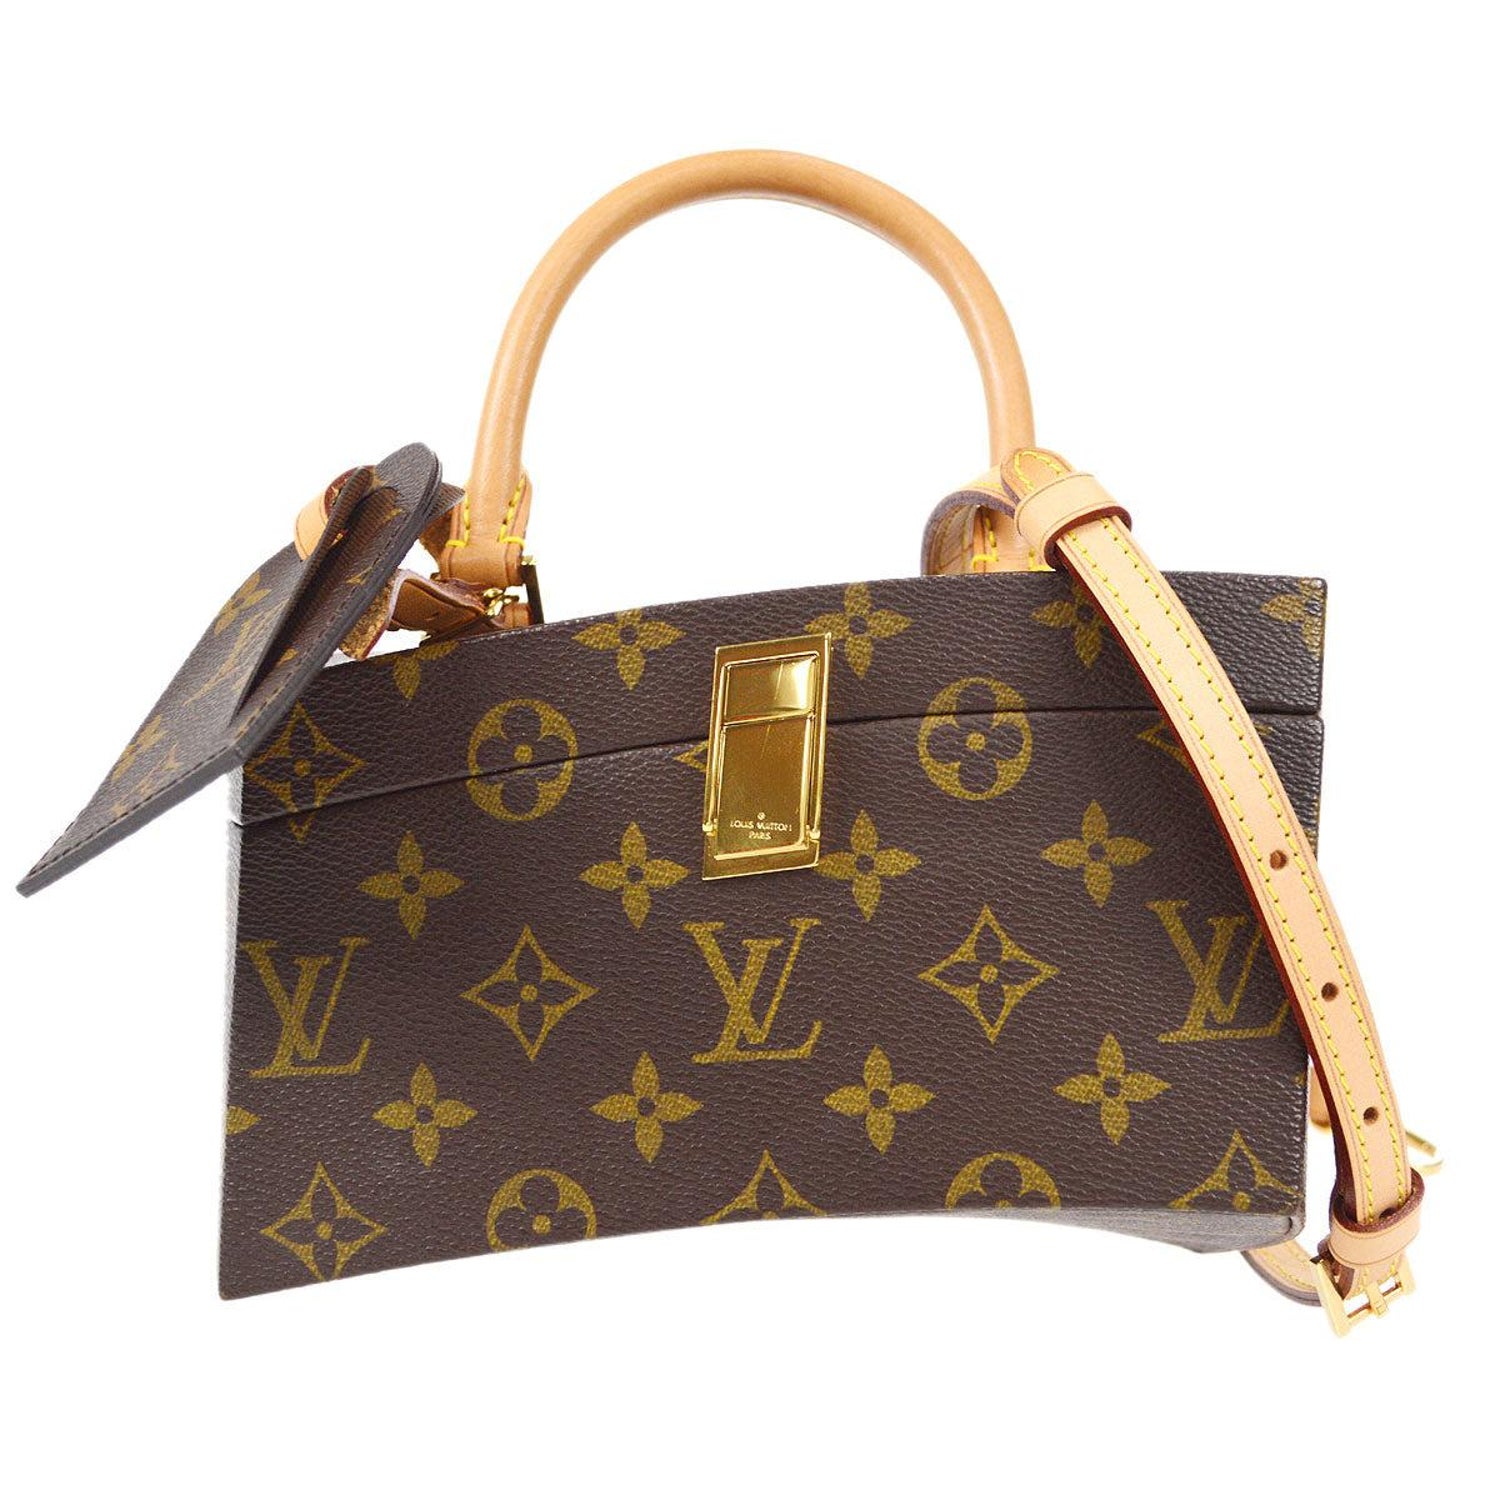 4 Things People Love About Louis Vuitton's LV Twist Bag!